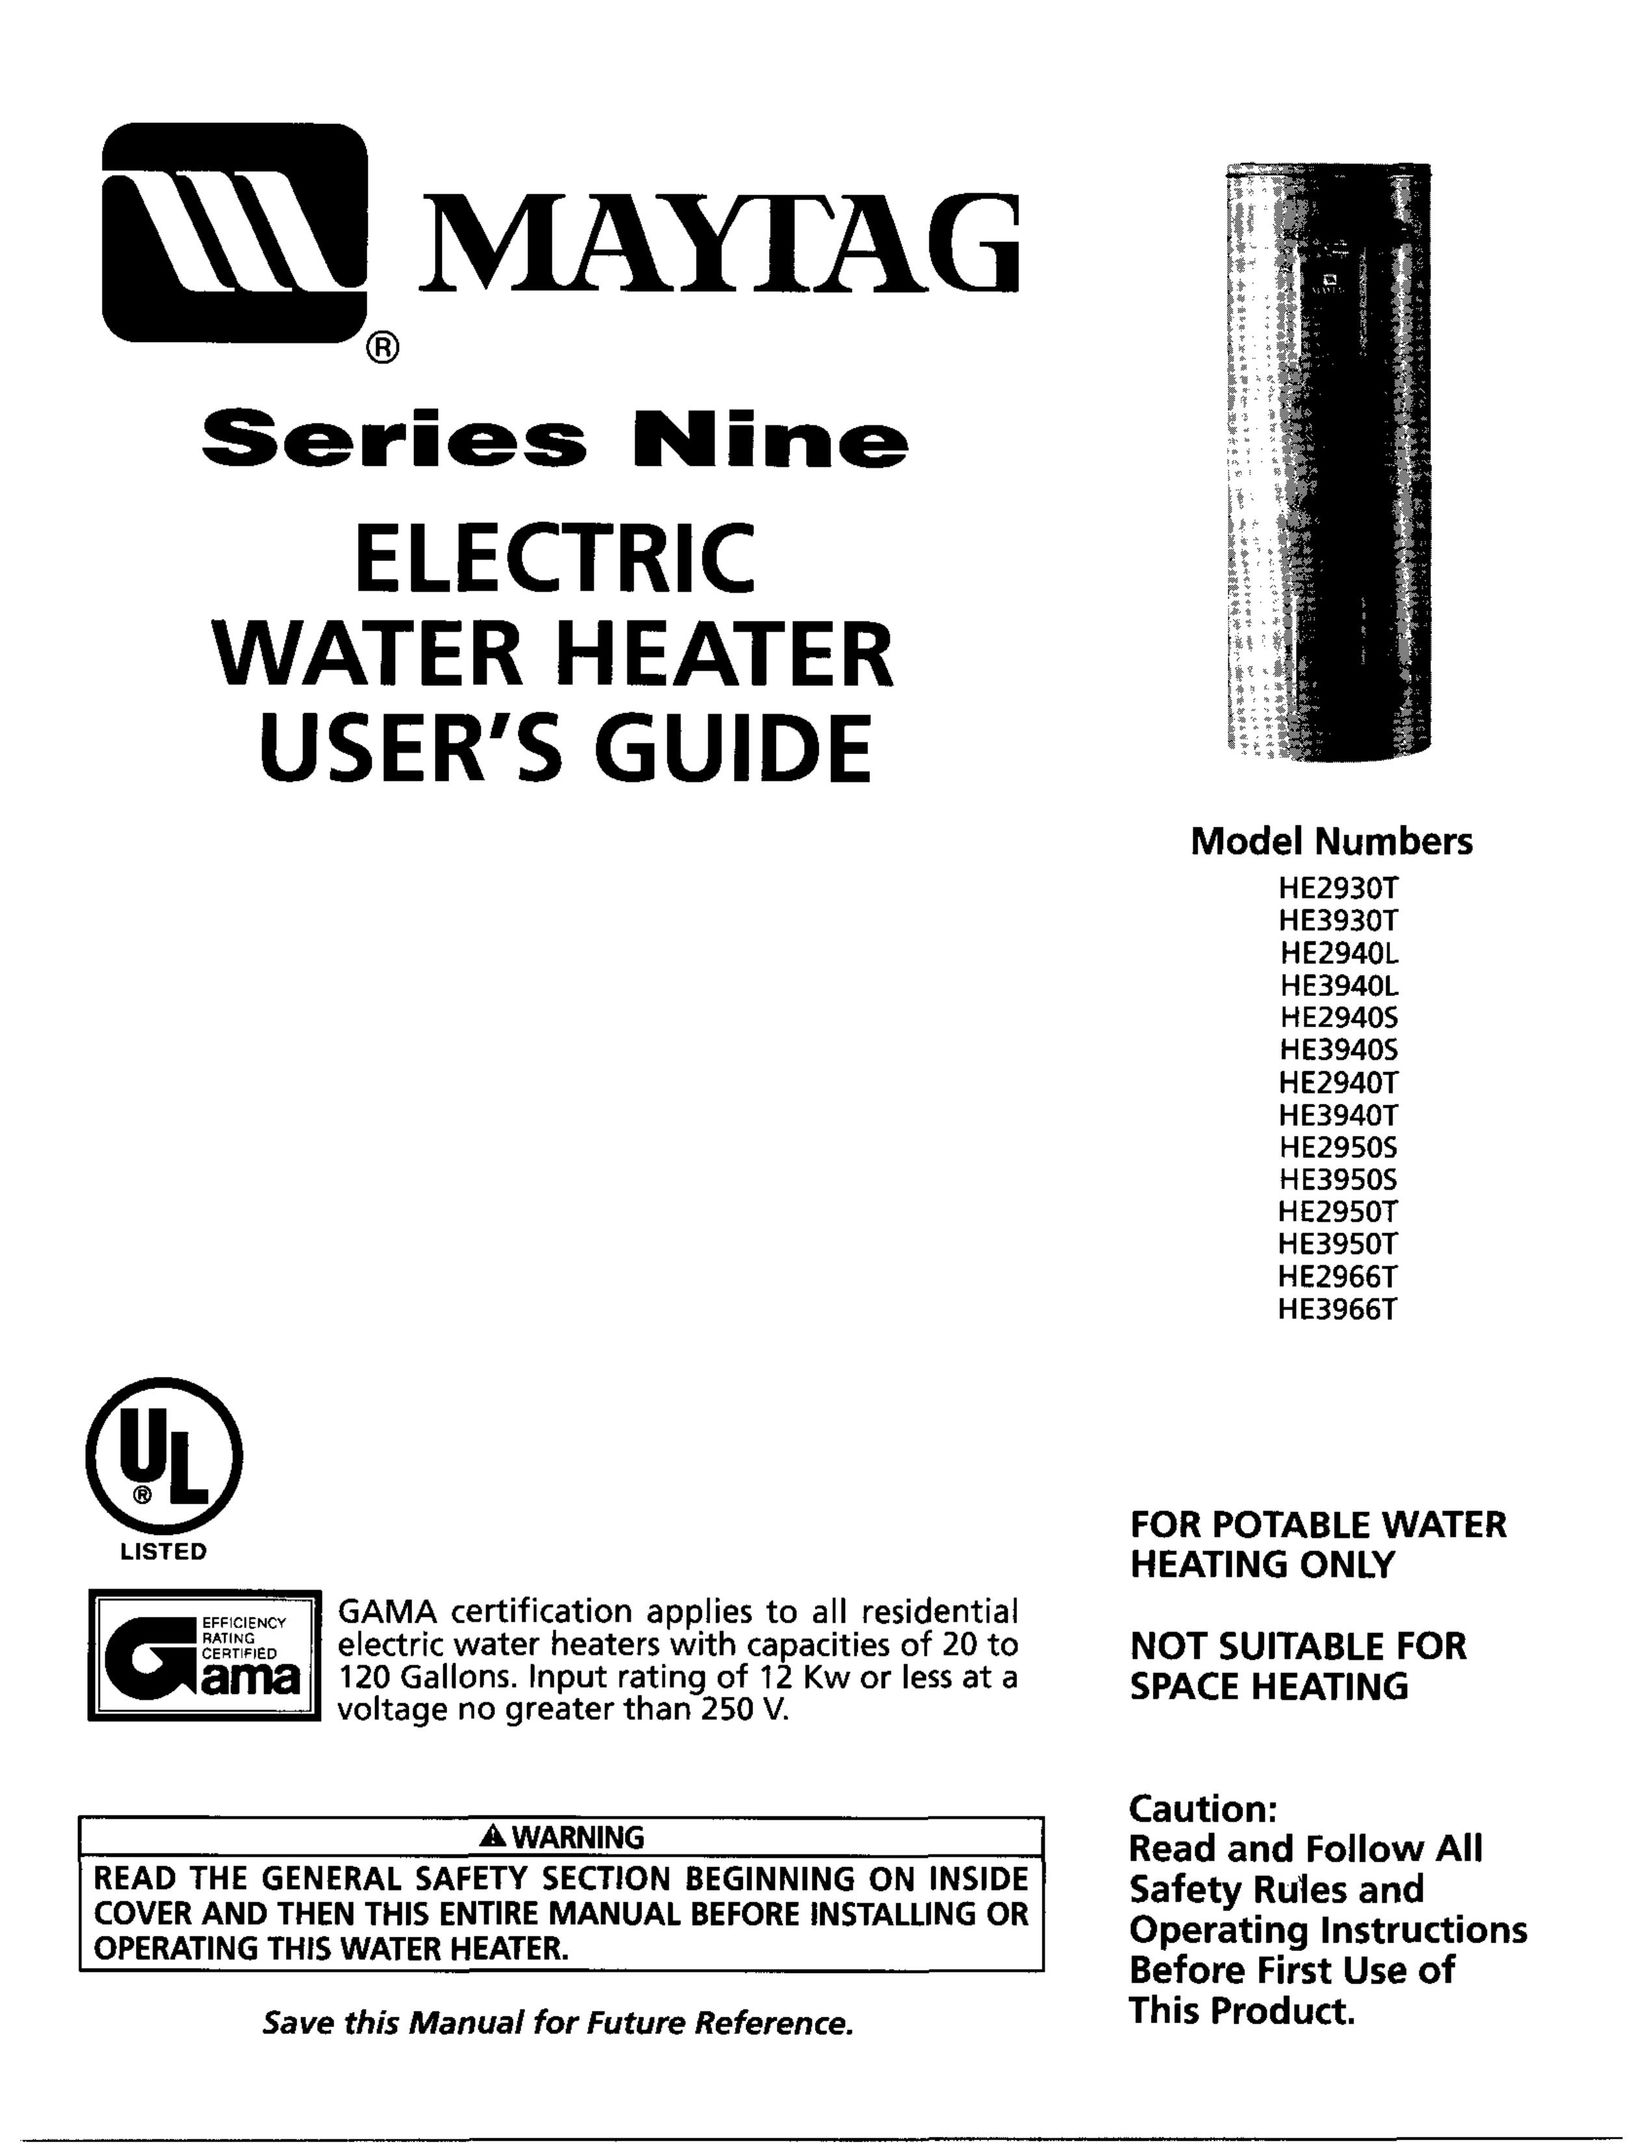 Maytag HE3940T Water Heater User Manual